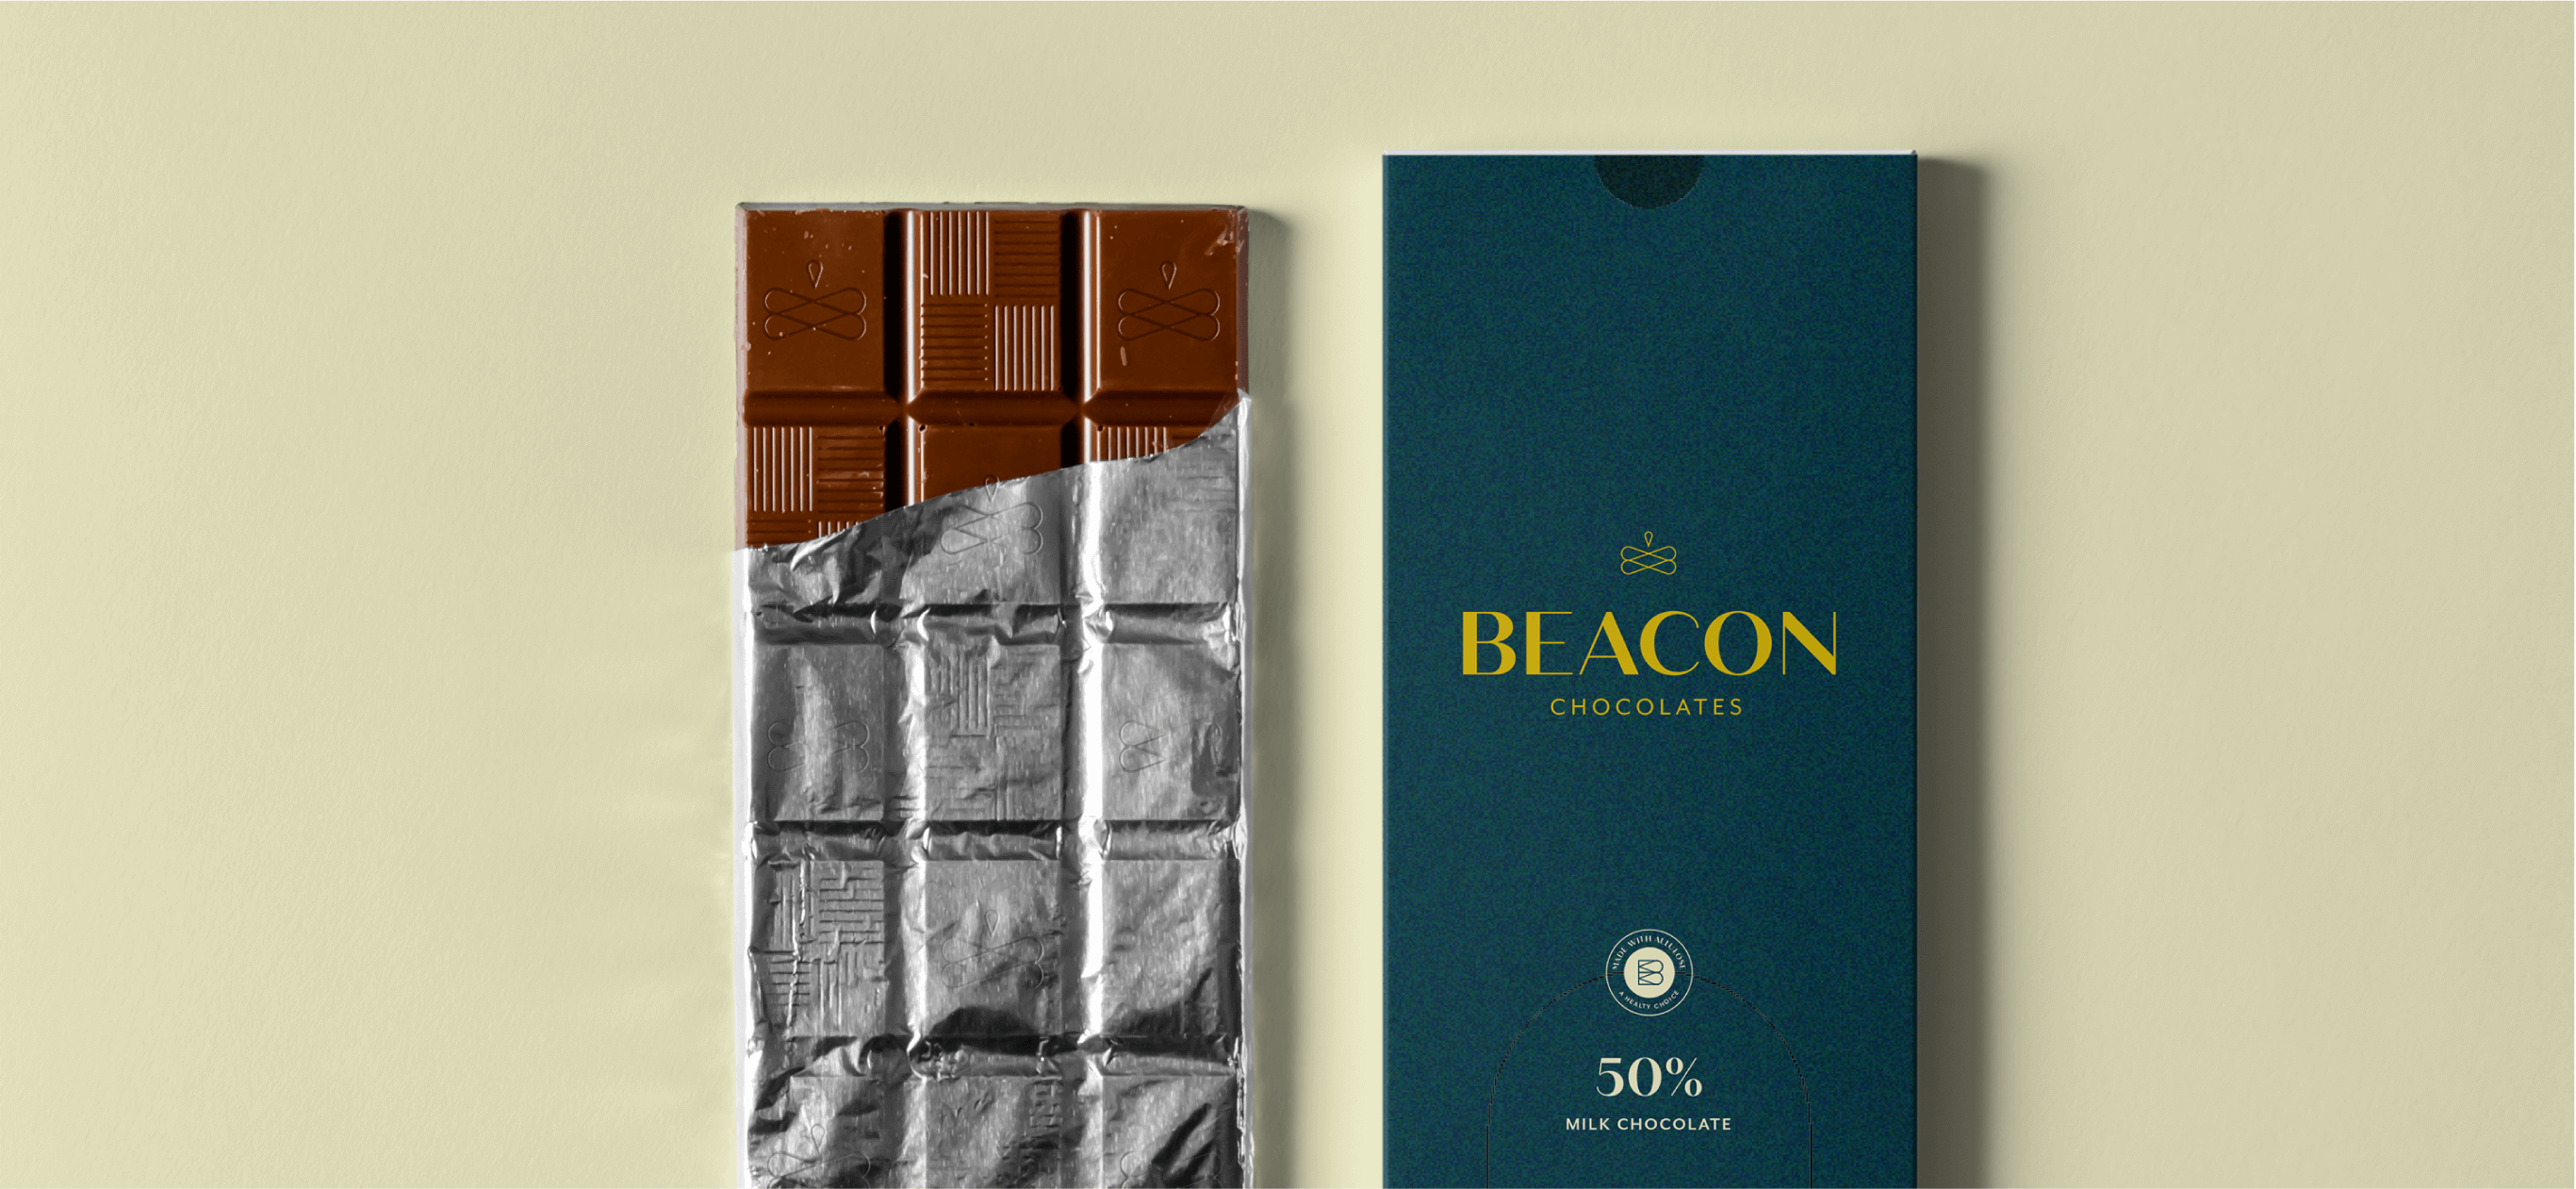 Beacon Chocolate Identity and Packaging—06@2x